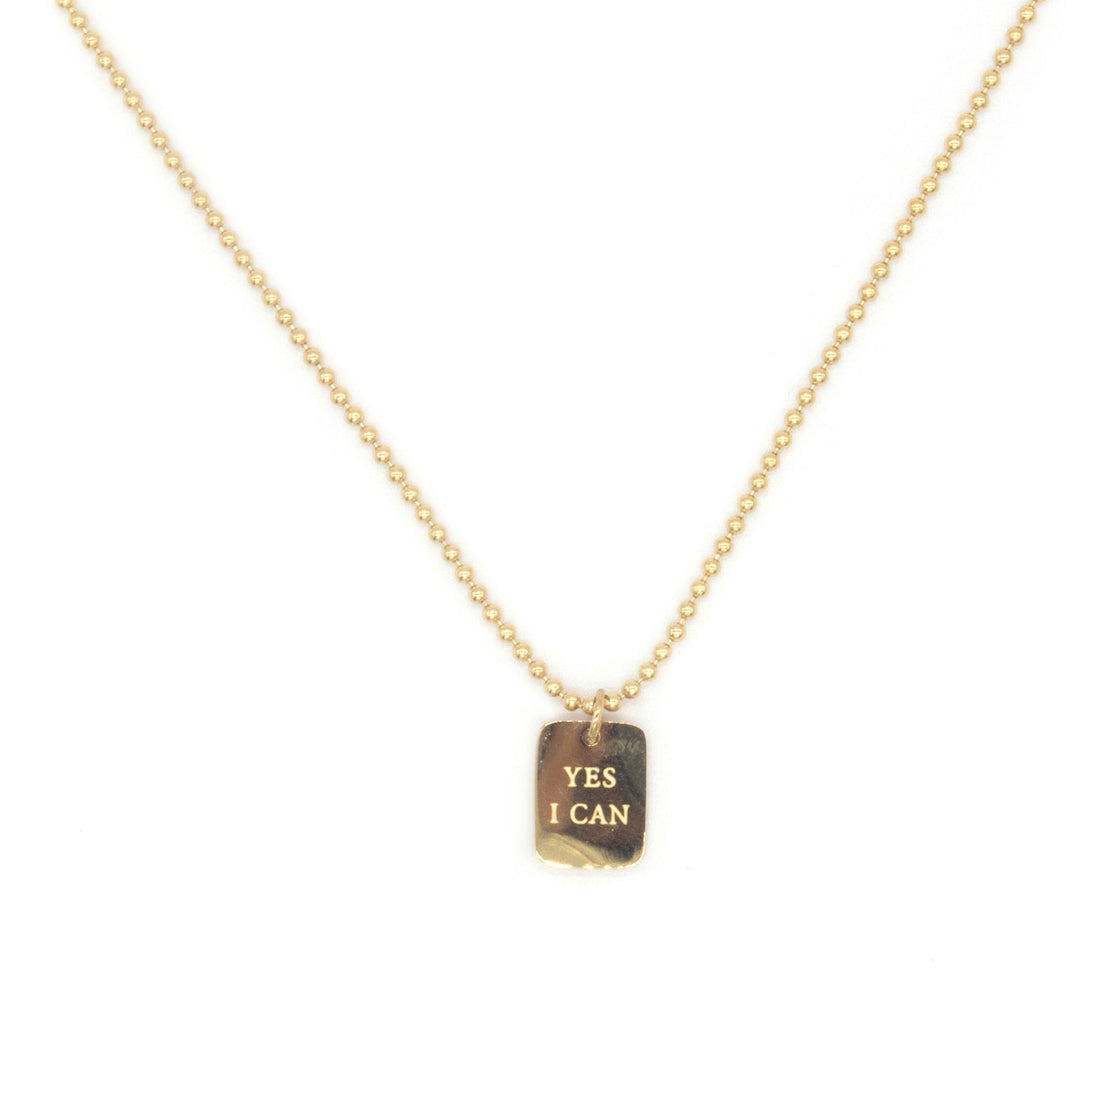 zag-bijoux-necklace-sns4106-yes-i-can-gold-uni- (2)